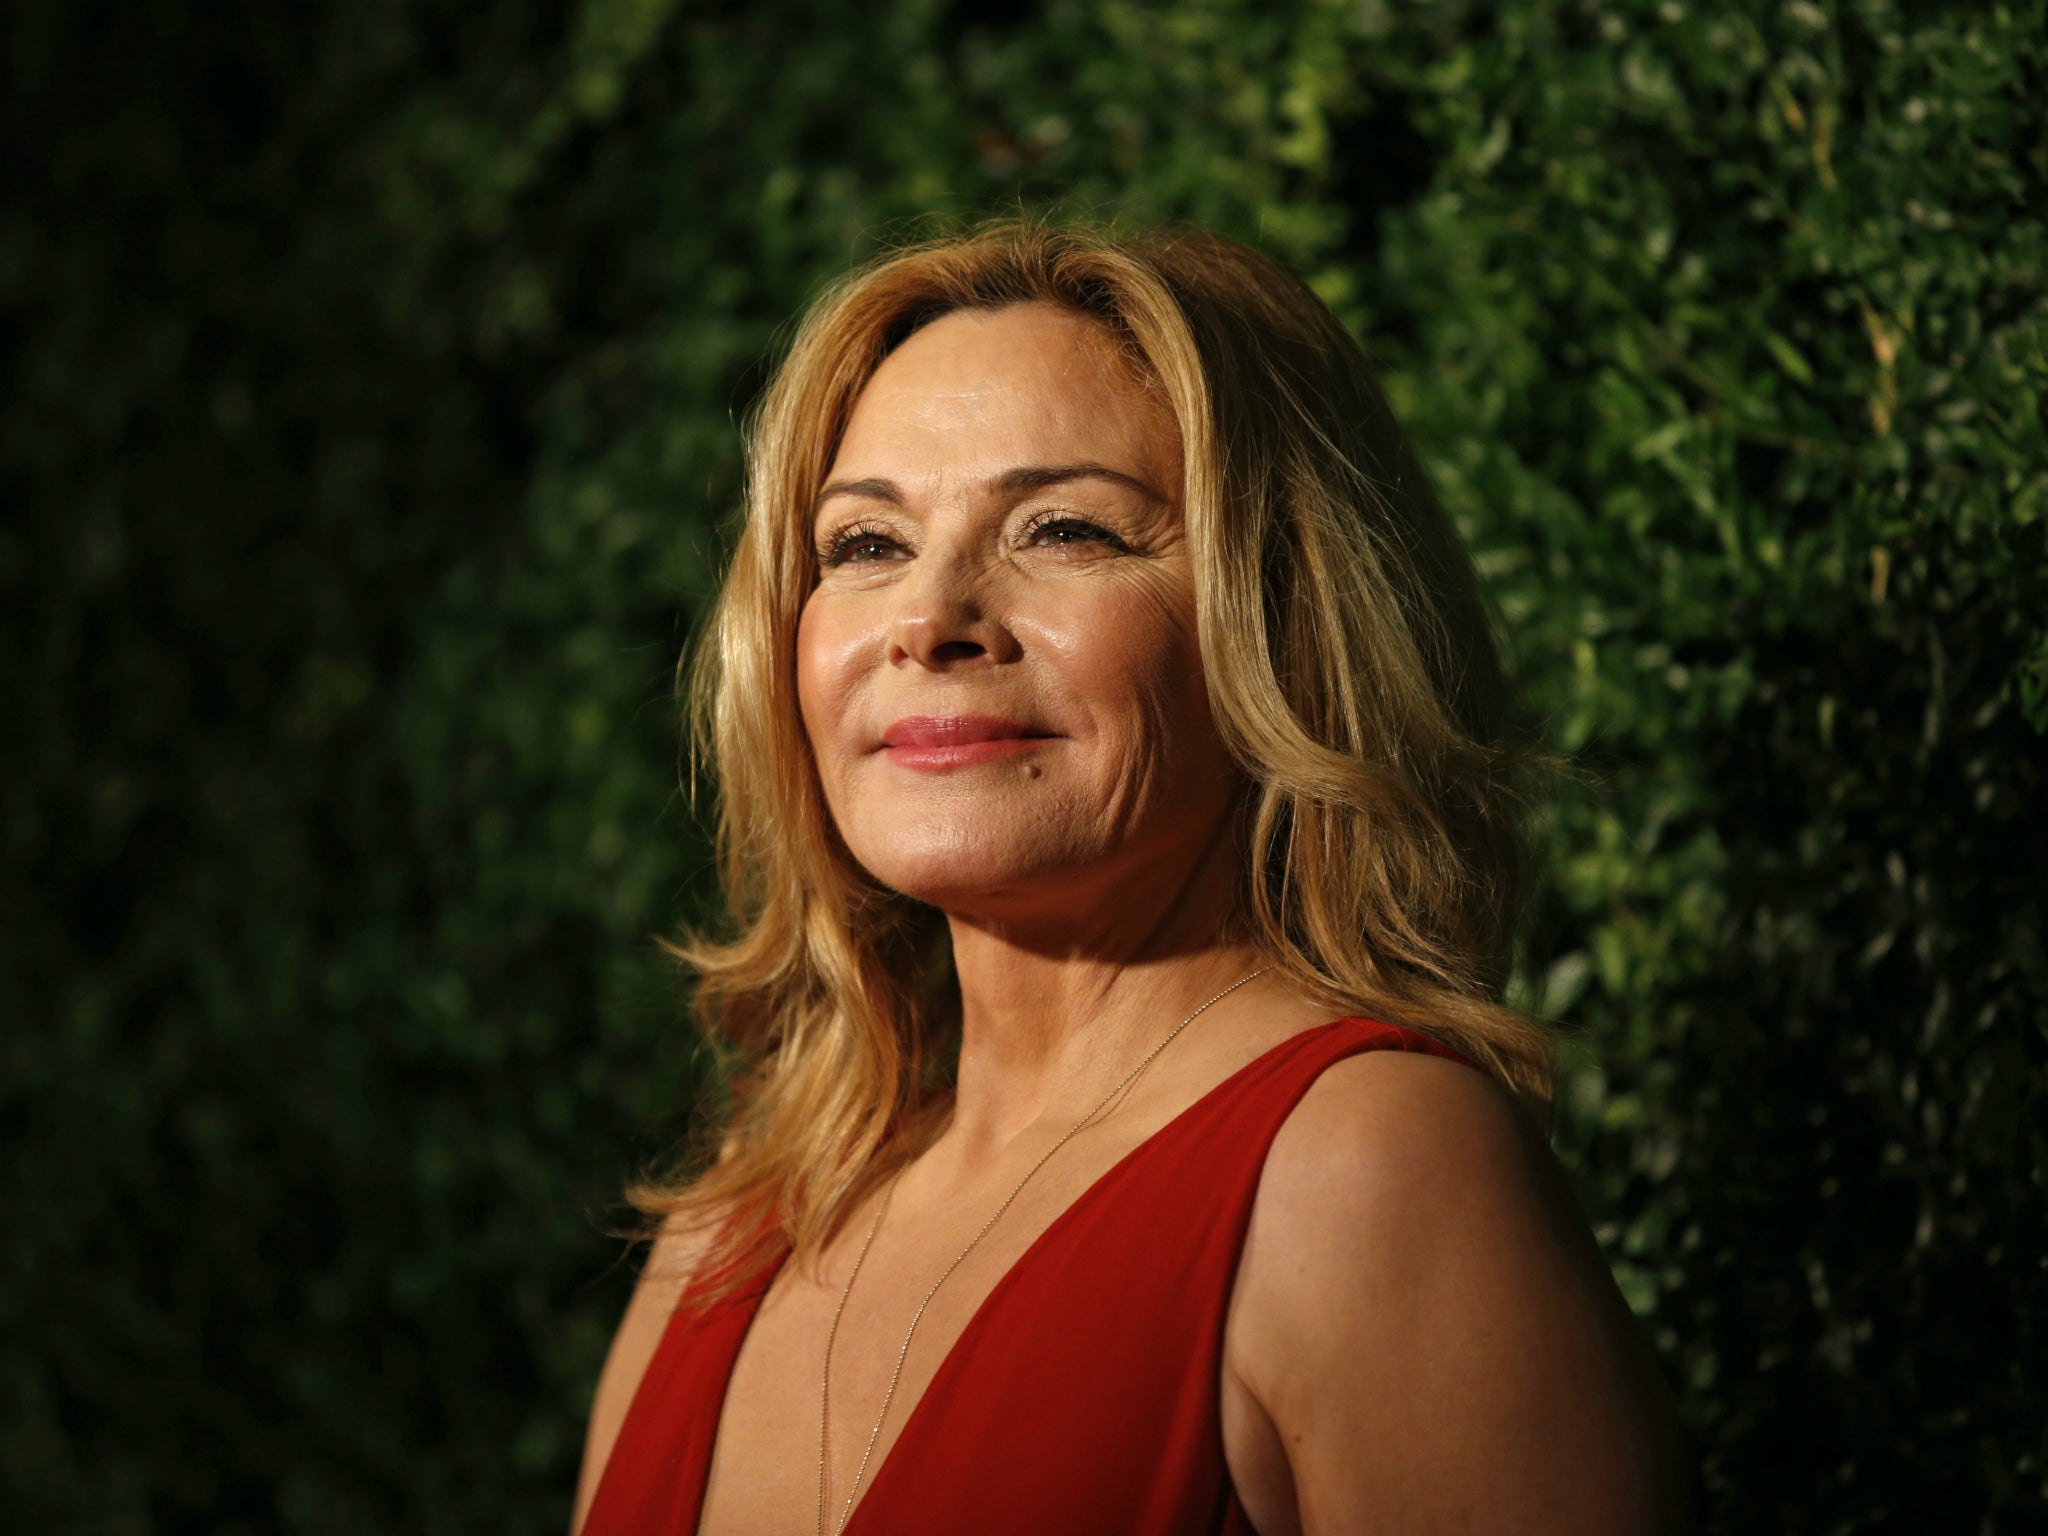 Kim Cattrall famously said that she didn't want to be referred to as "childless" as she found the term offensive